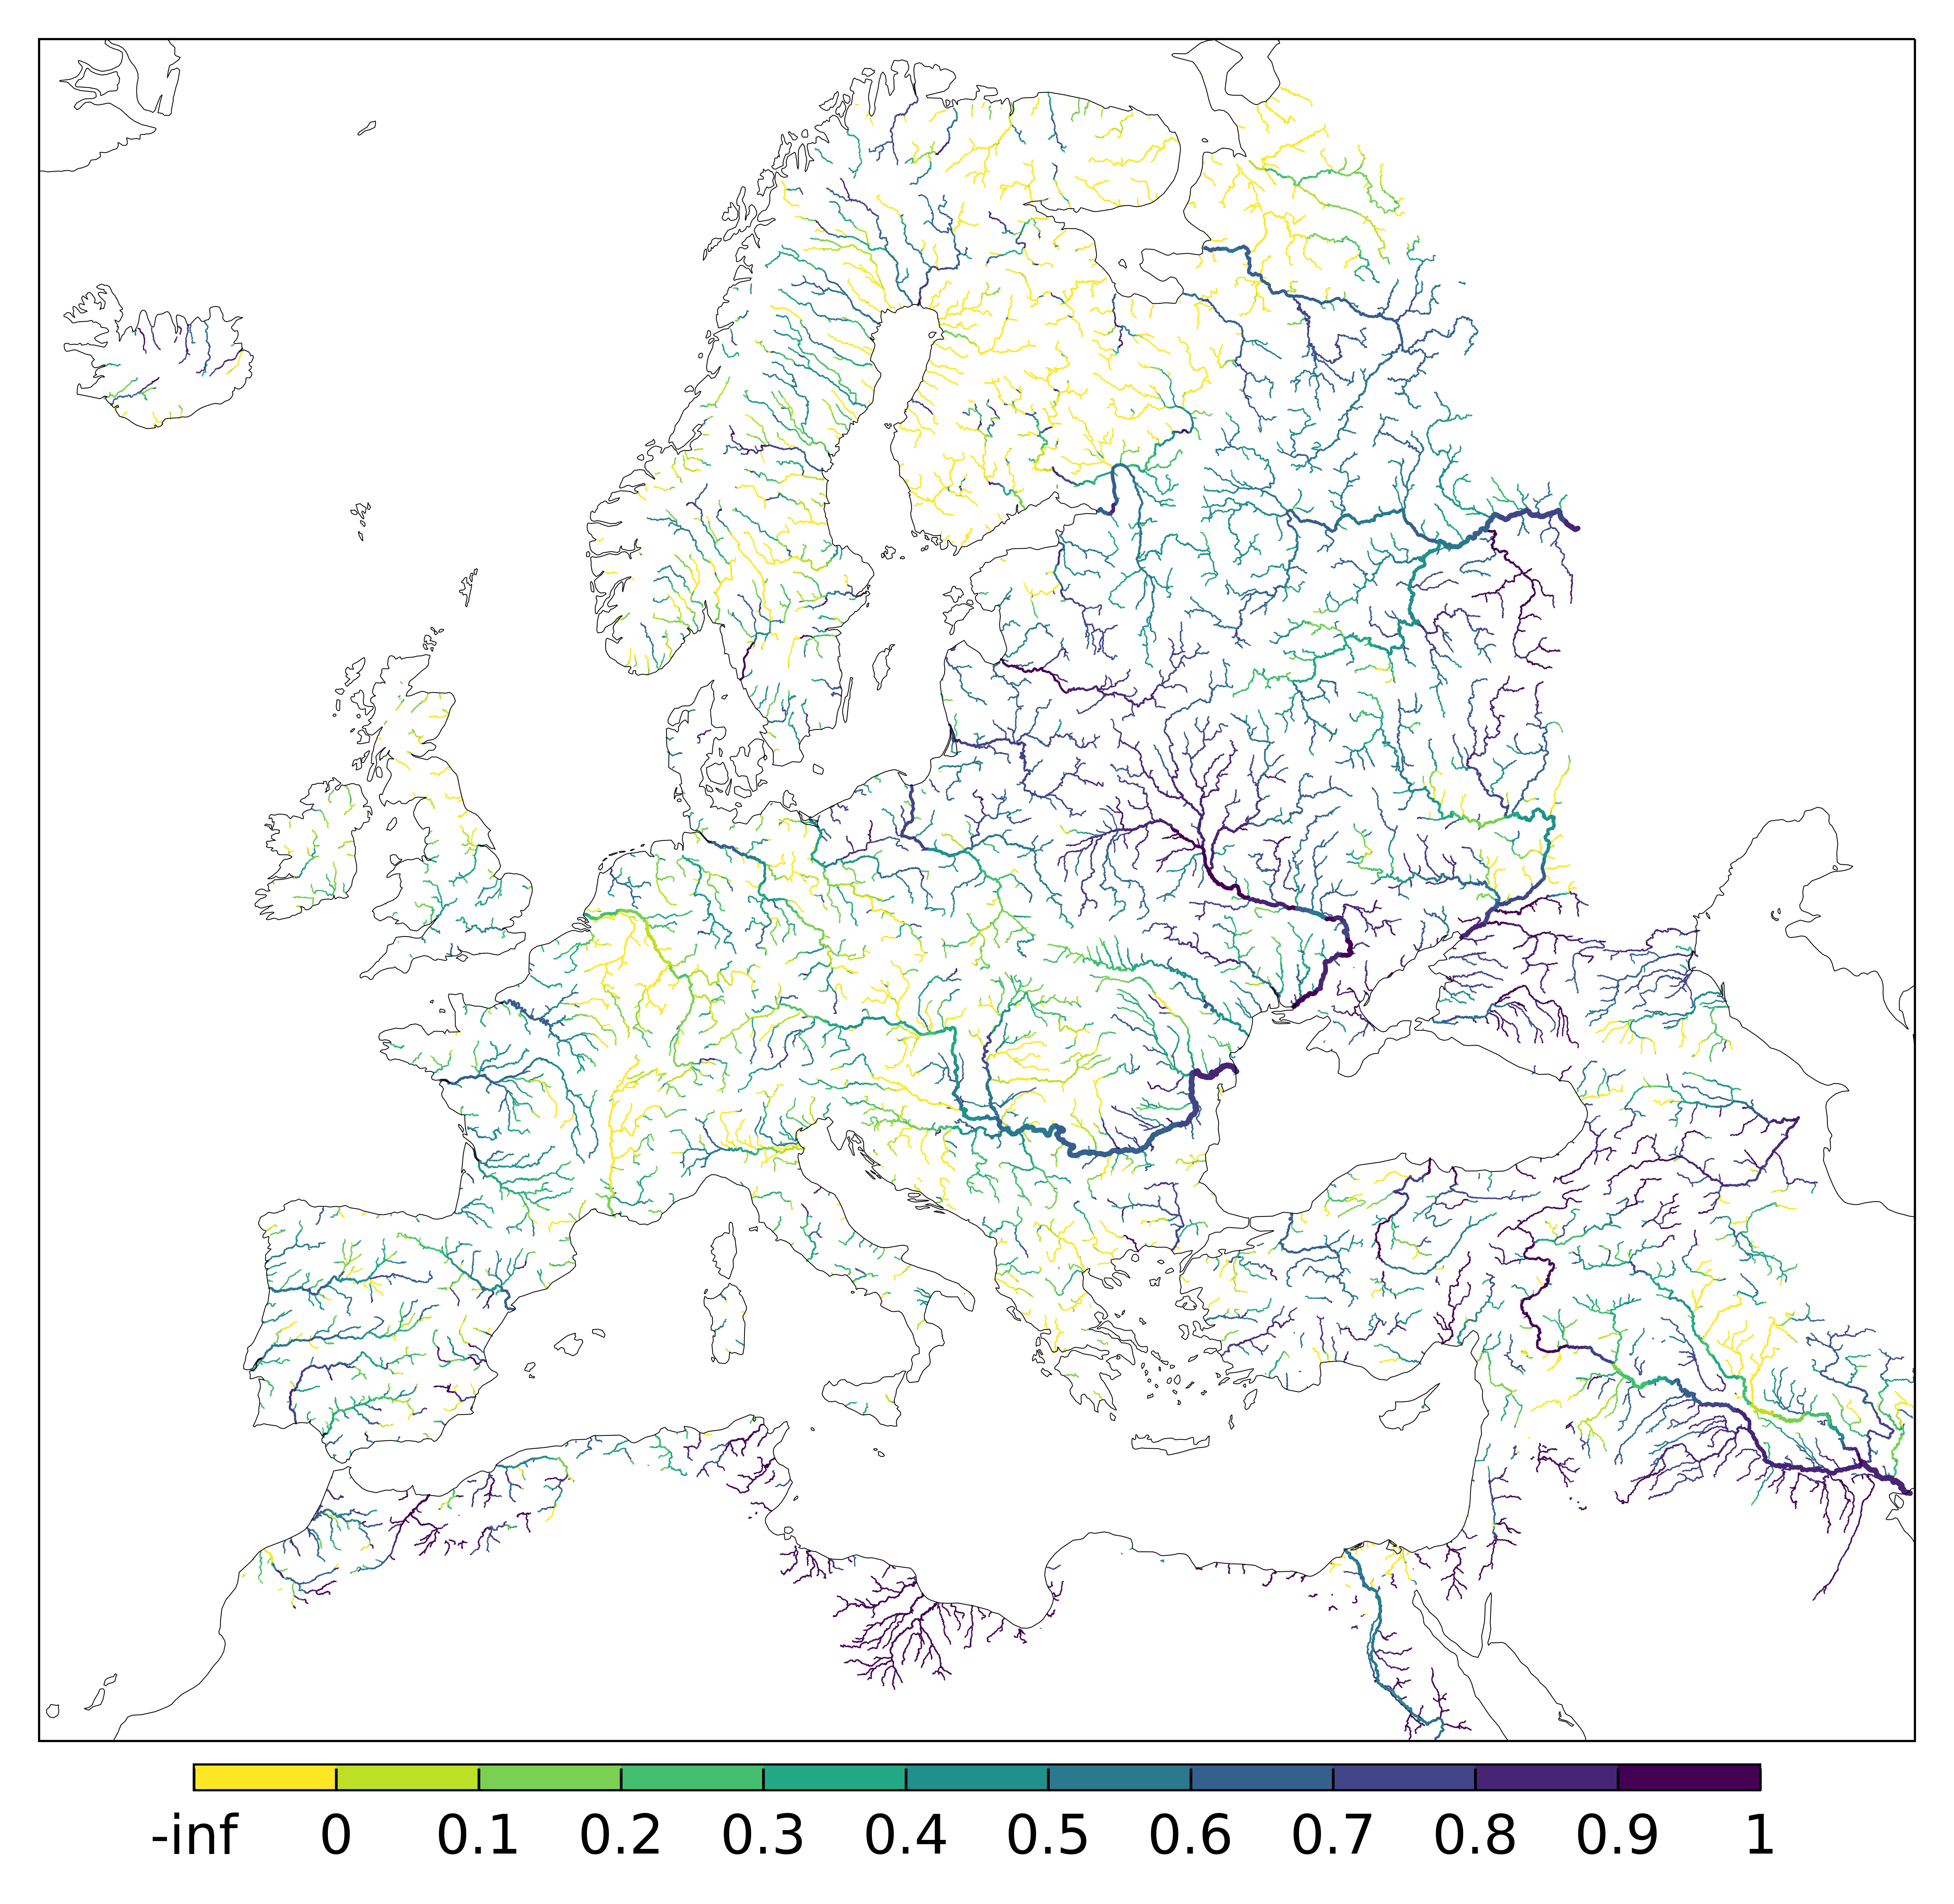 Figure 4. EFAS CRPSS at lead-time 10 day for March 2024 across the EFAS domain for catchments larger than 1000km2. Climatology is used as the reference forecast.